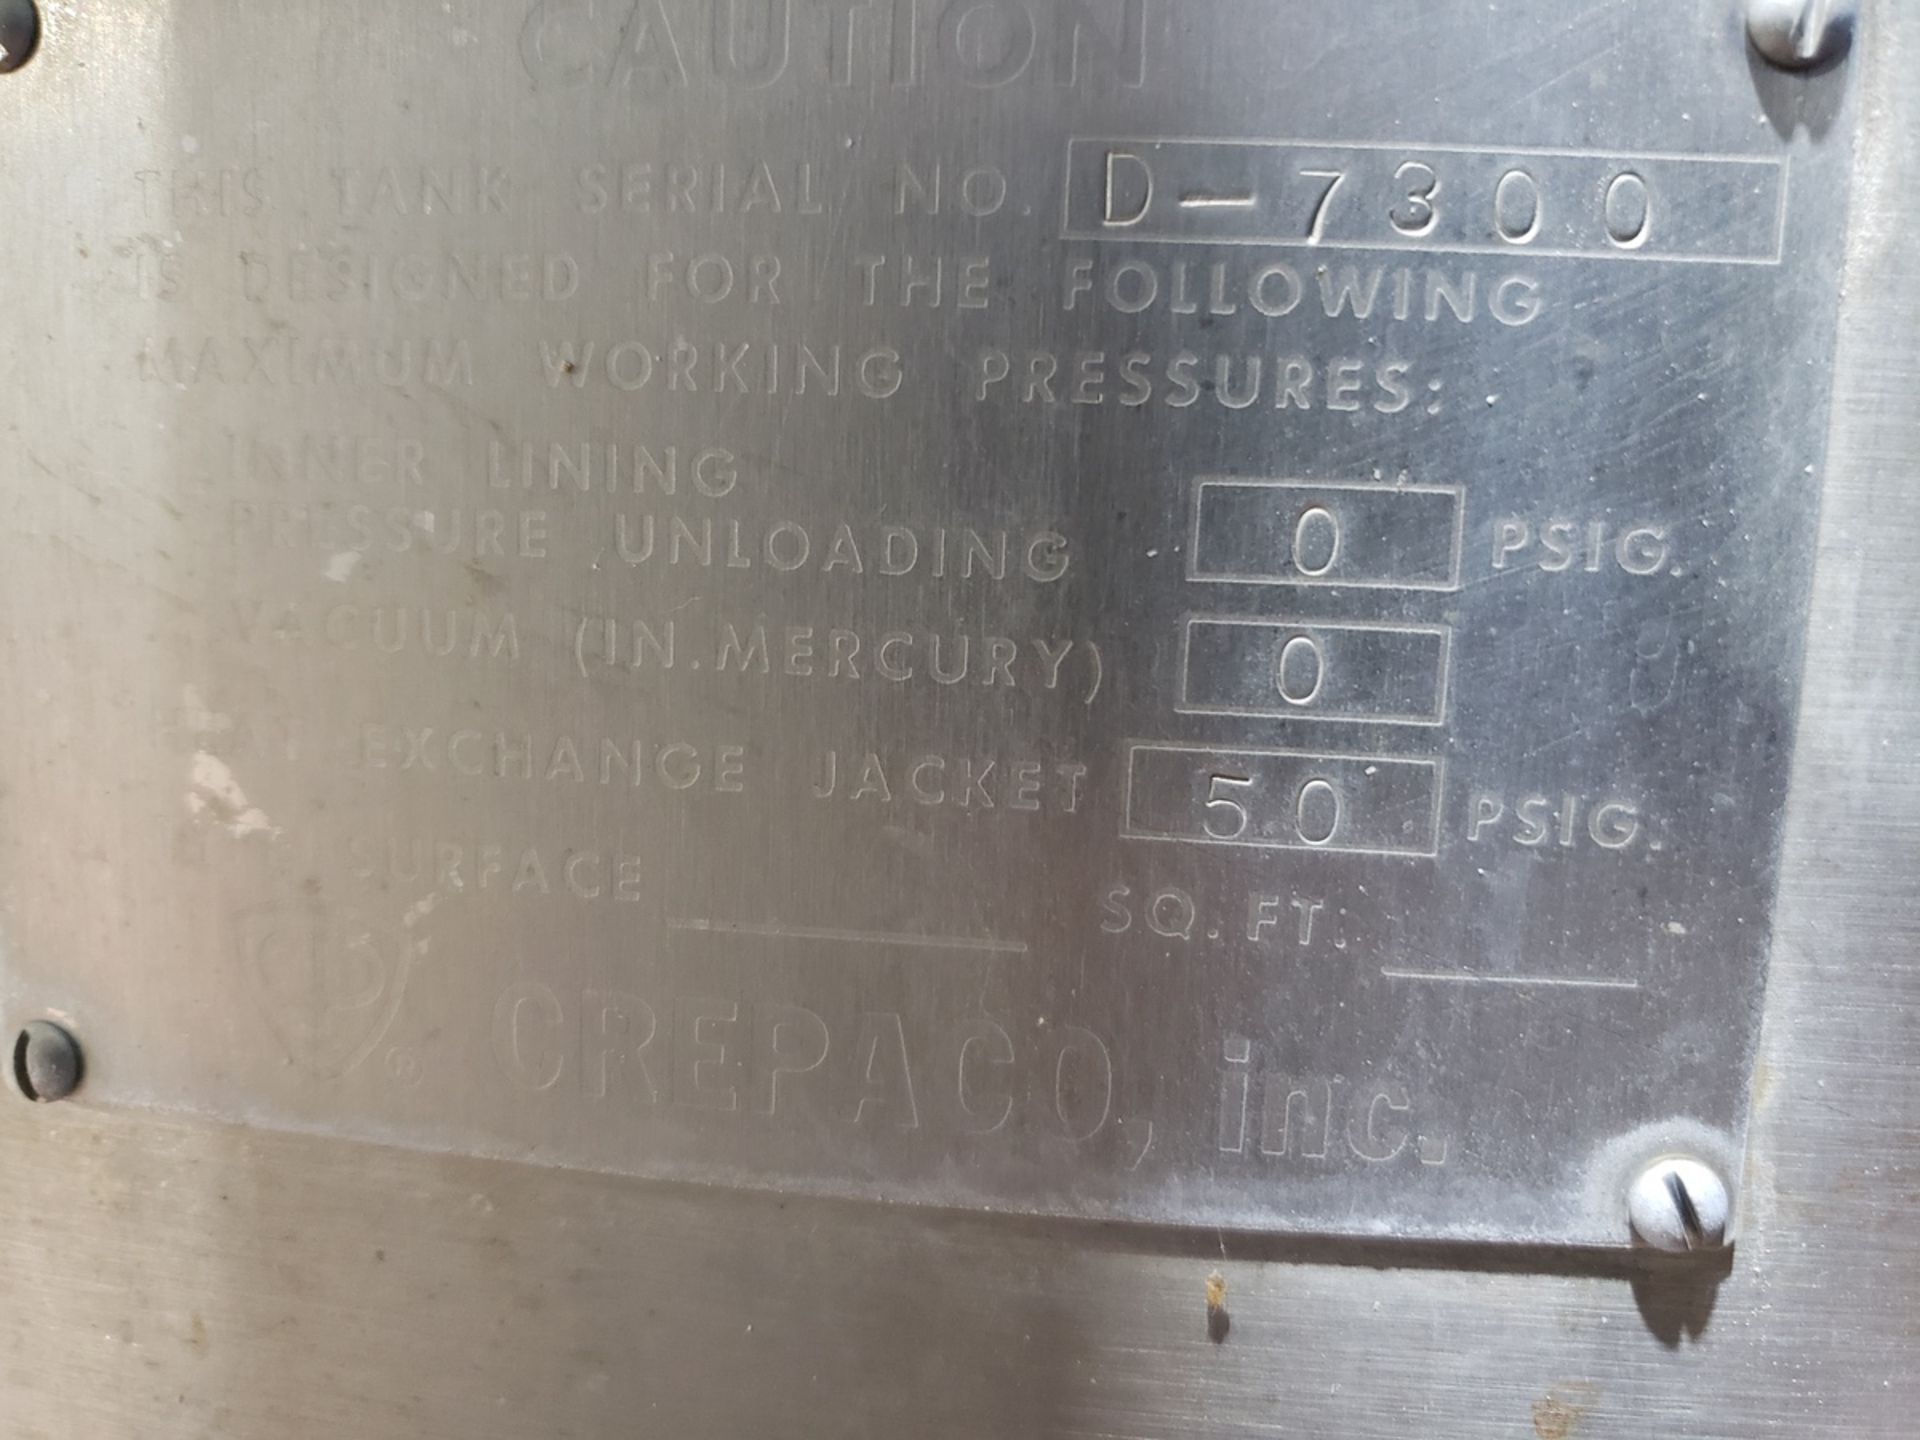 APV Crepaco 150 Gallon Stainless Steel Jacketed Mixing Tank, S/N D-7300 | Rig Fee $250 - Image 3 of 4